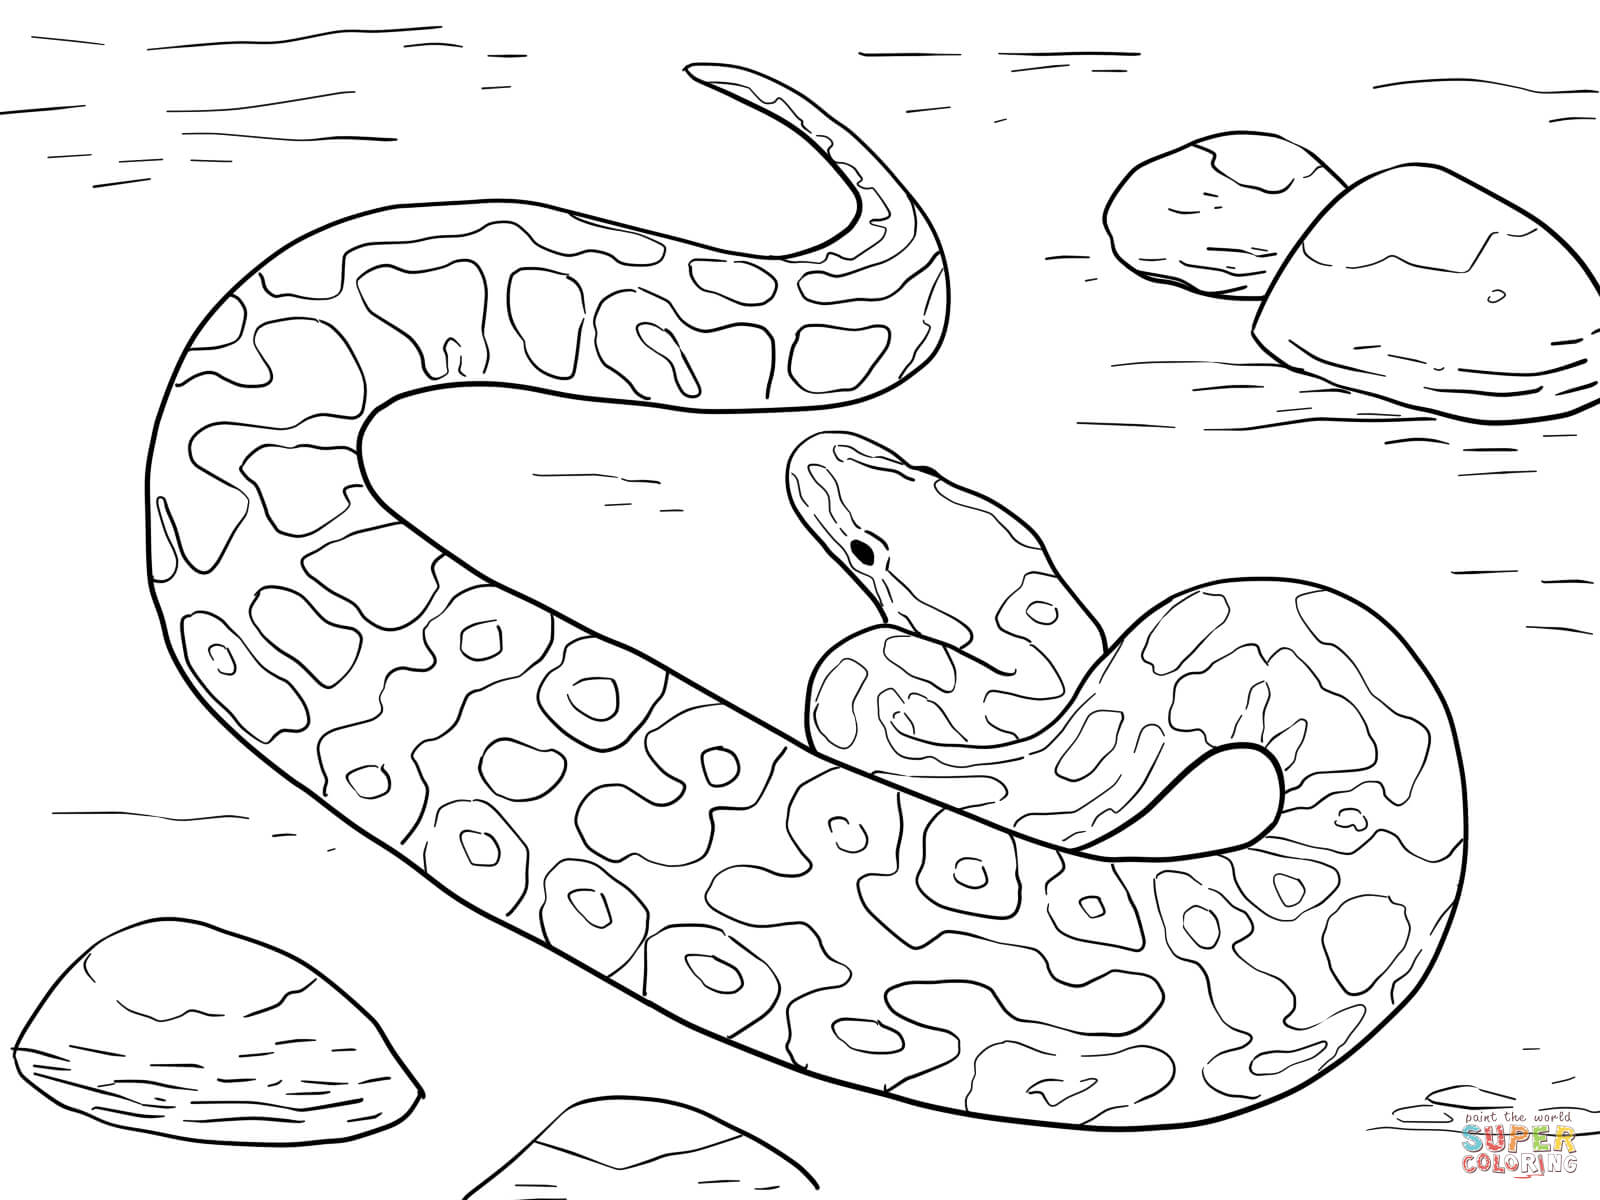 White Python coloring #8, Download drawings